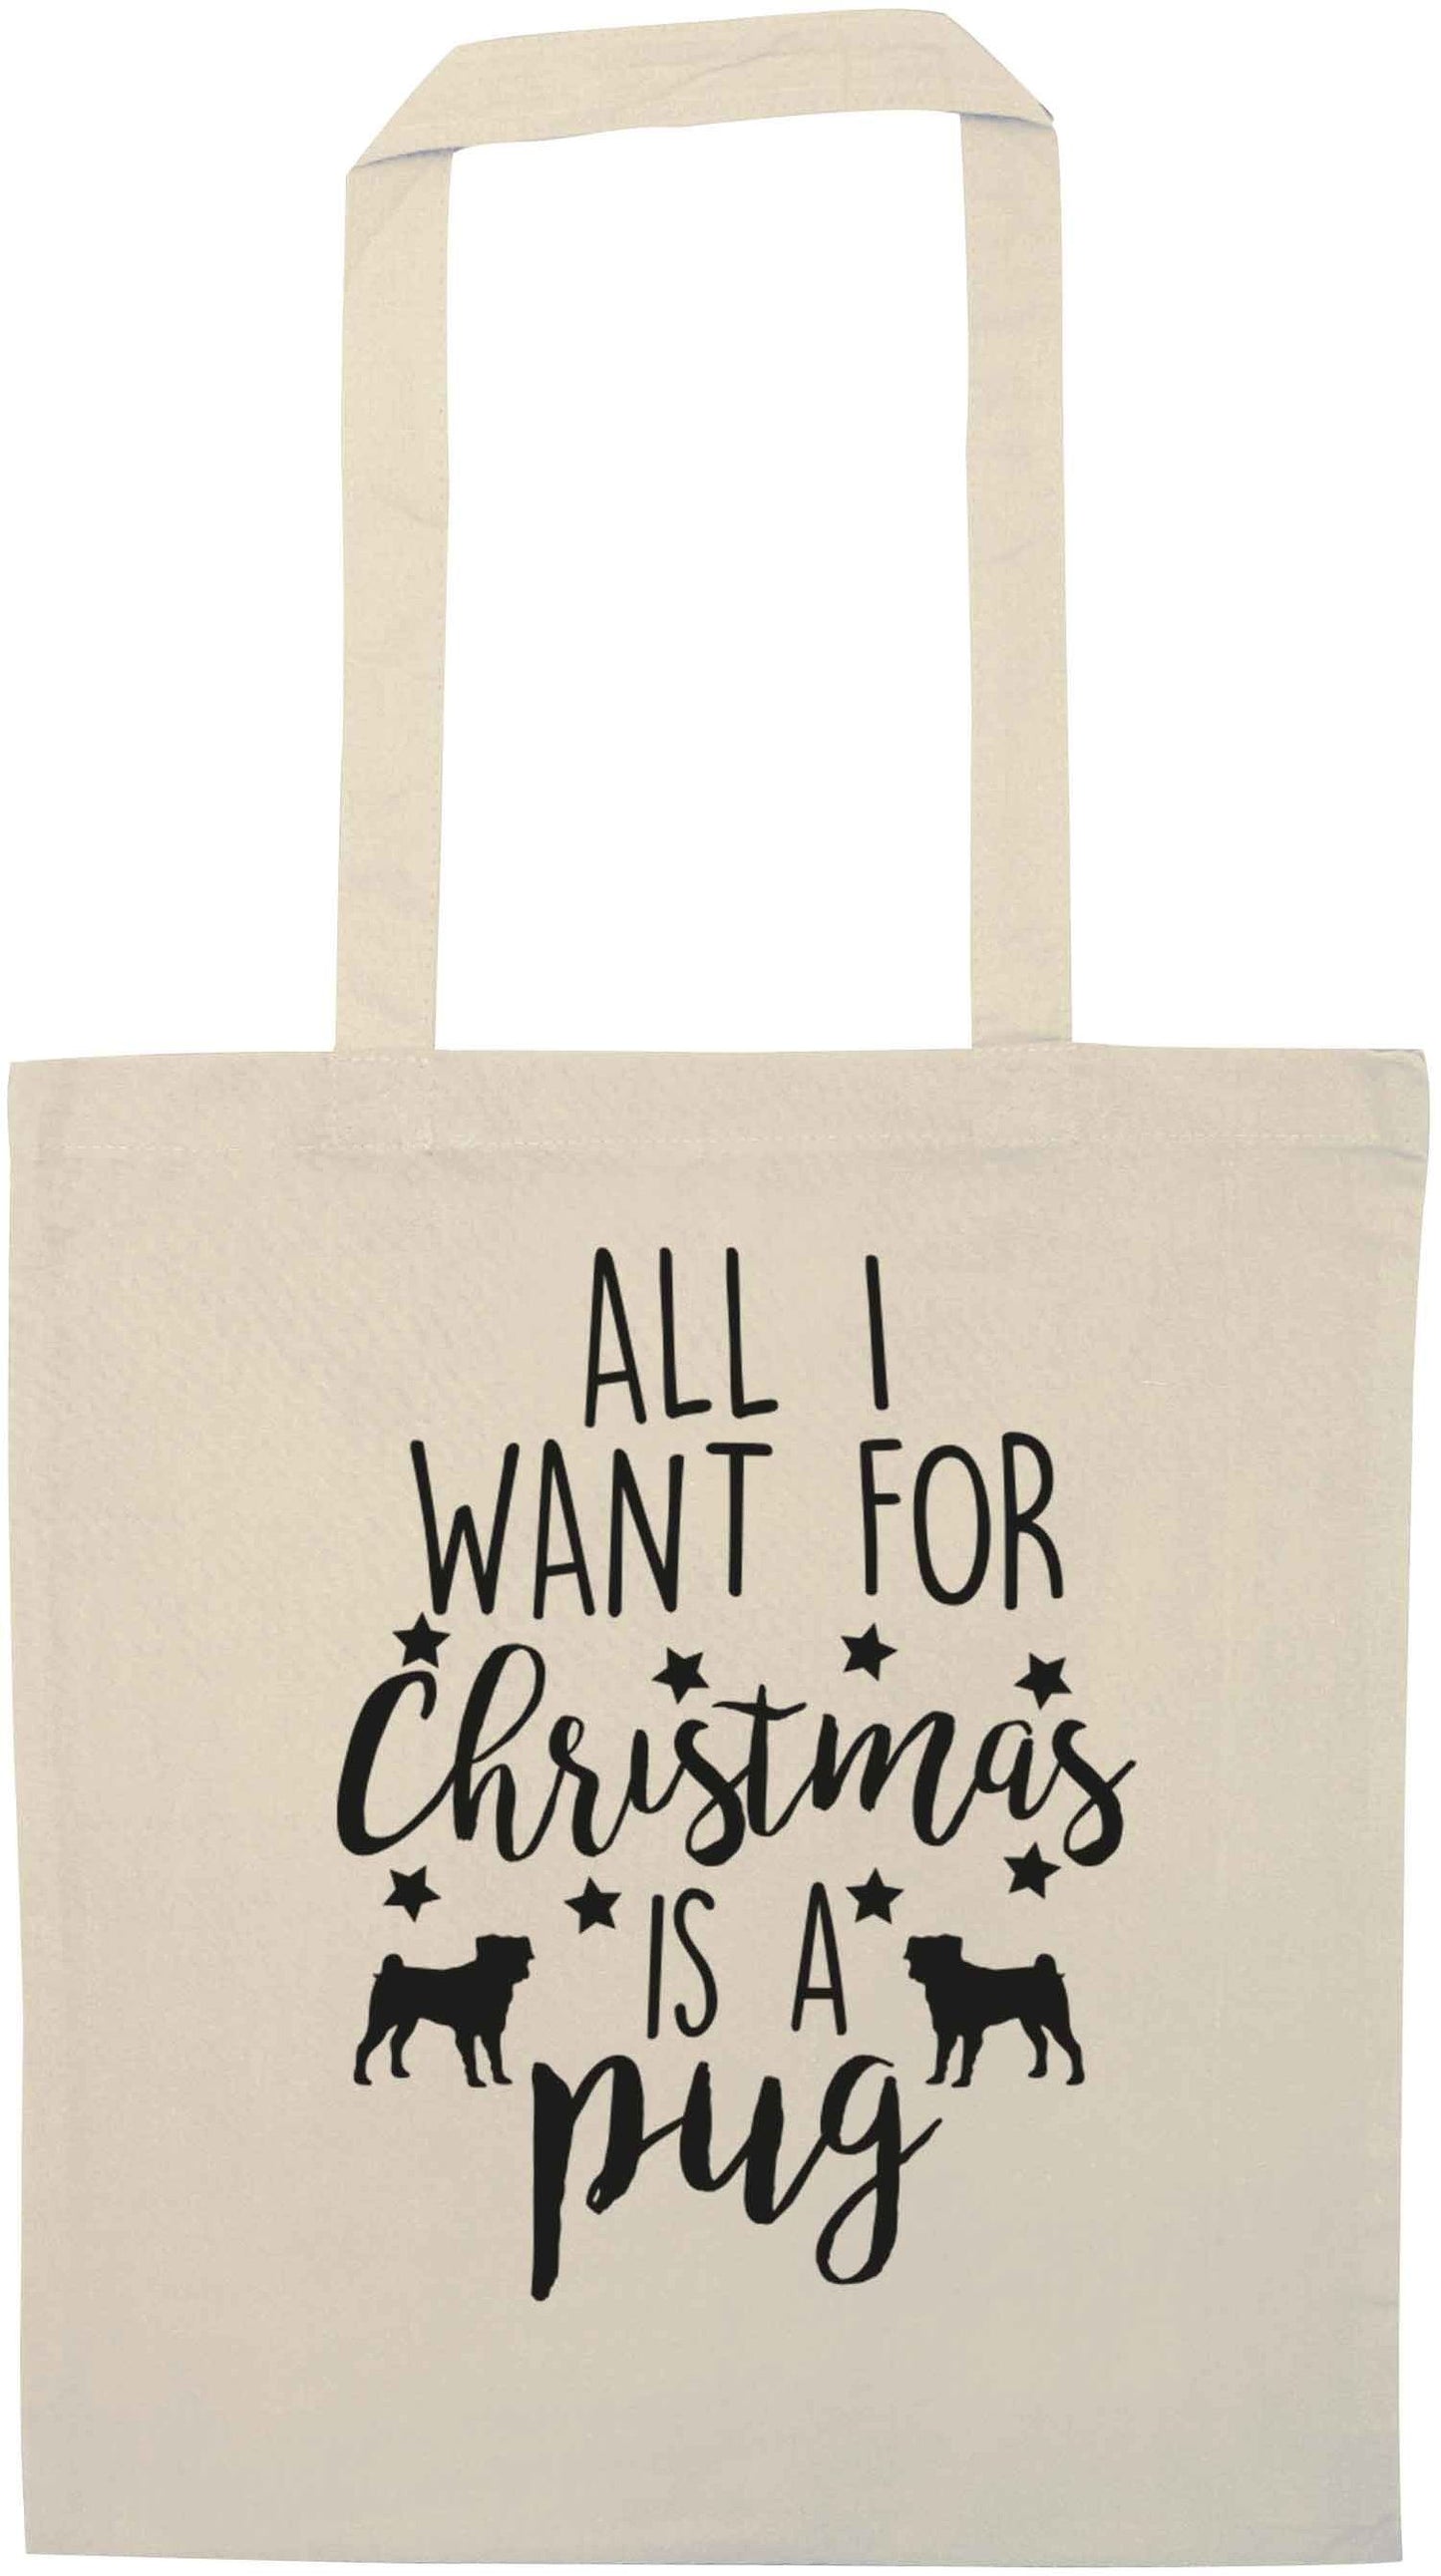 All I want for Christmas is a pug natural tote bag